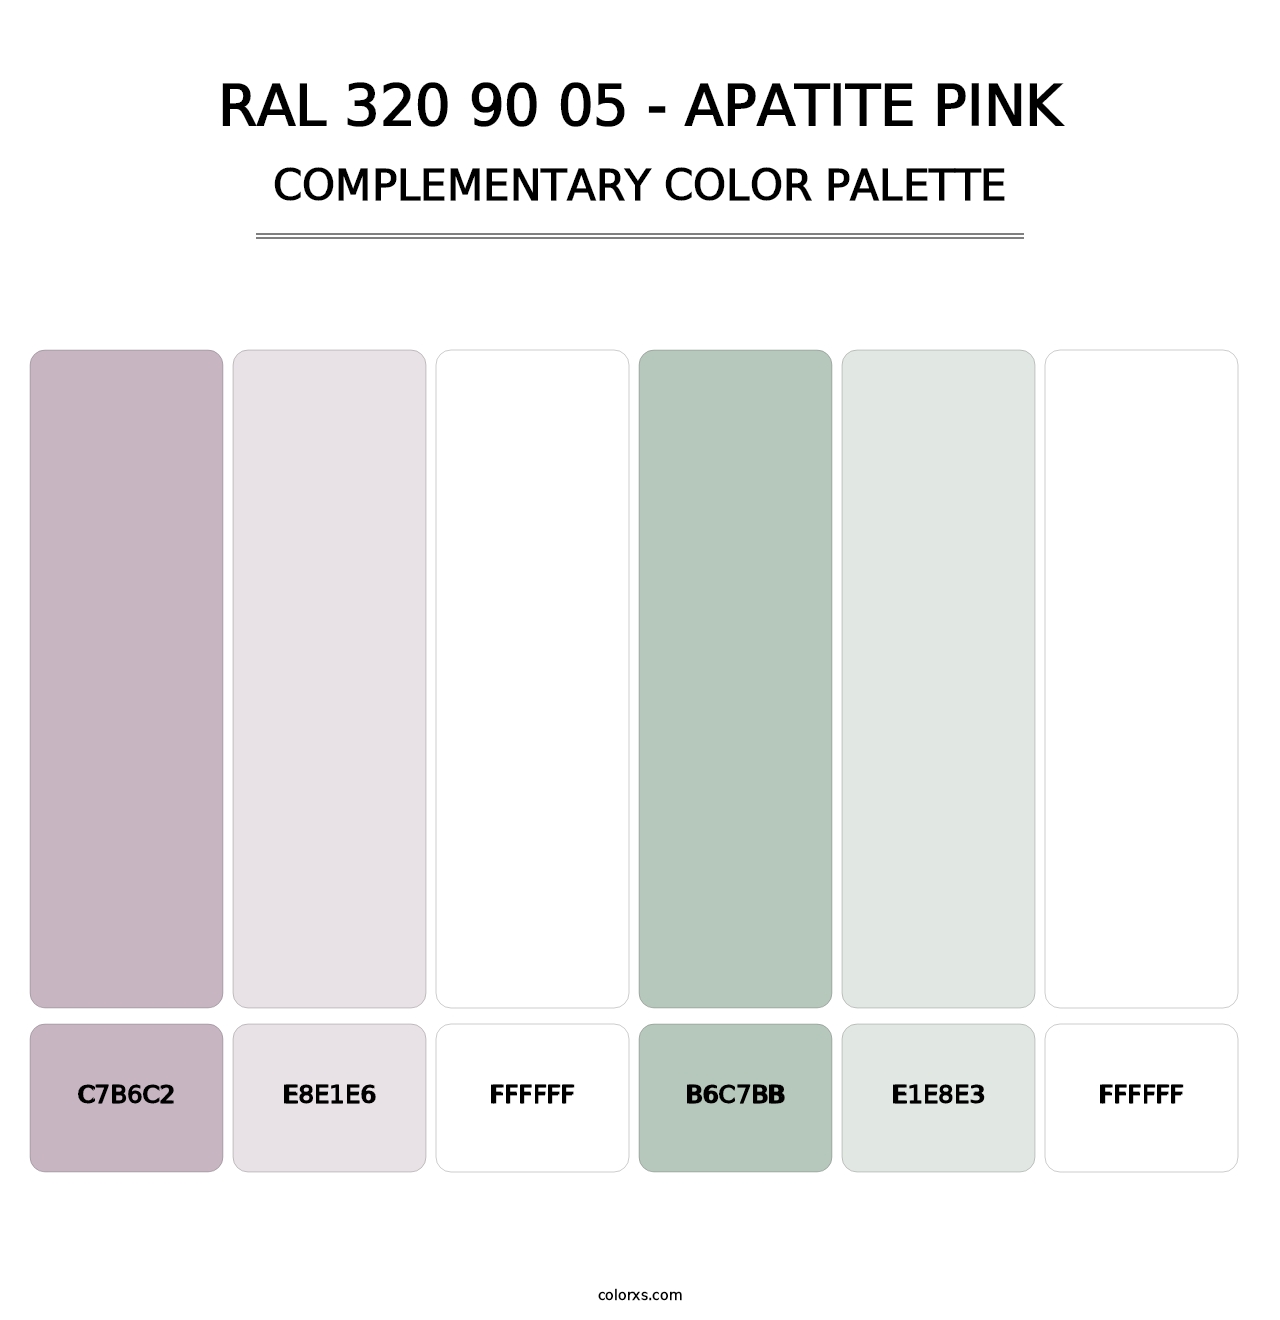 RAL 320 90 05 - Apatite Pink - Complementary Color Palette